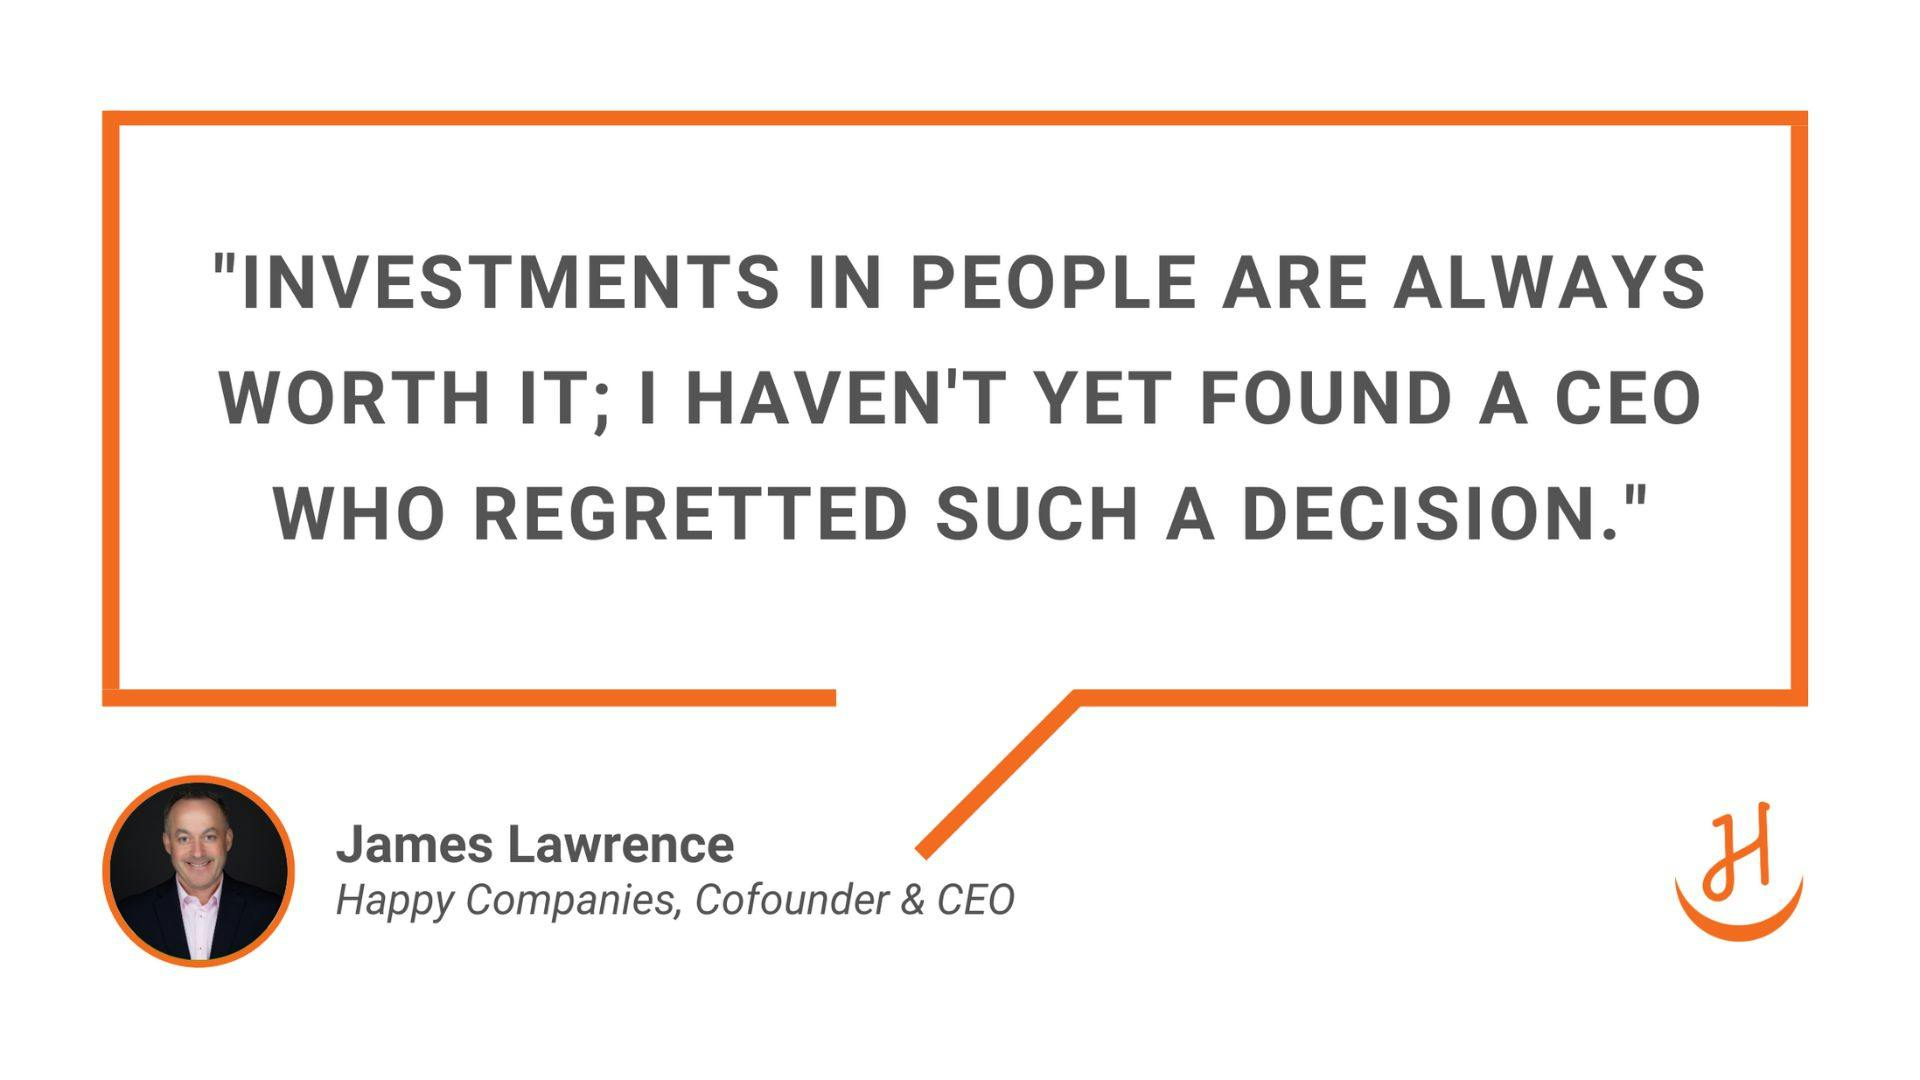 "Investments in people are always worth it; I haven't yet found a CEO who regretted such a decision." Quote by James Lawrence, Happy Cofounder & CEO